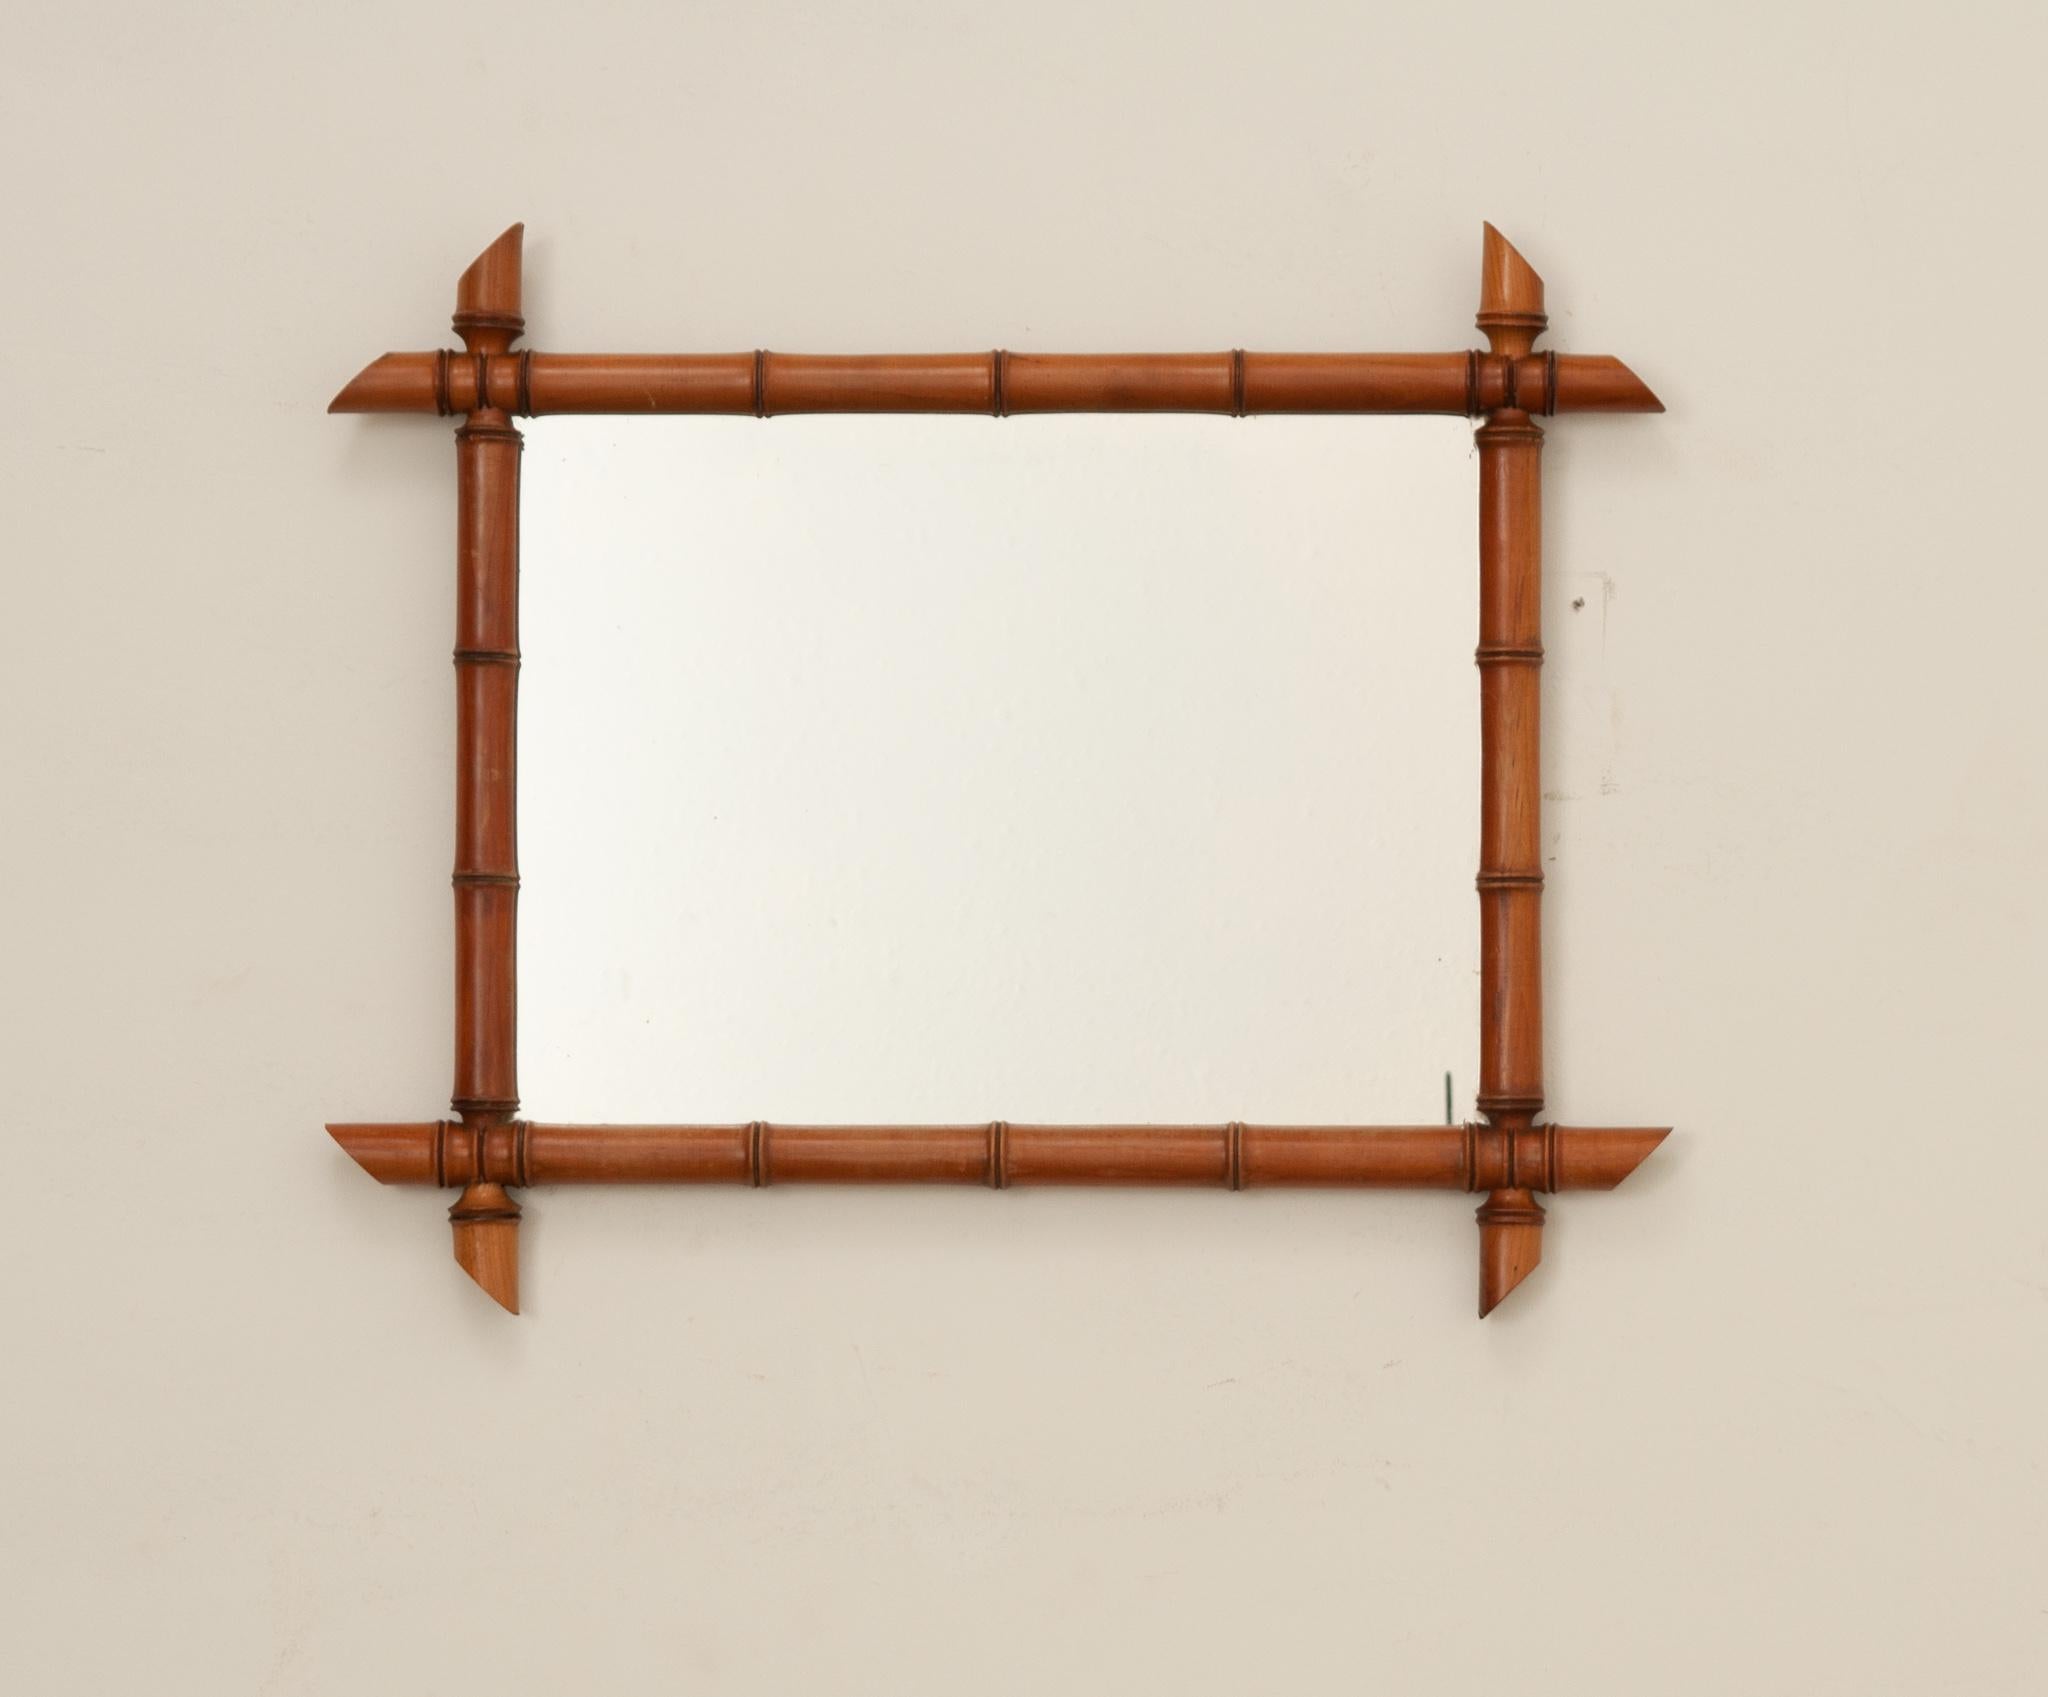 A delightful turned wood, faux bamboo mirror from early 20th Century France. The mirror’s wood frame has been artfully turned to a stylized bamboo motif. The mirrored glass is original to the antique with some foxing present. While the mirror is